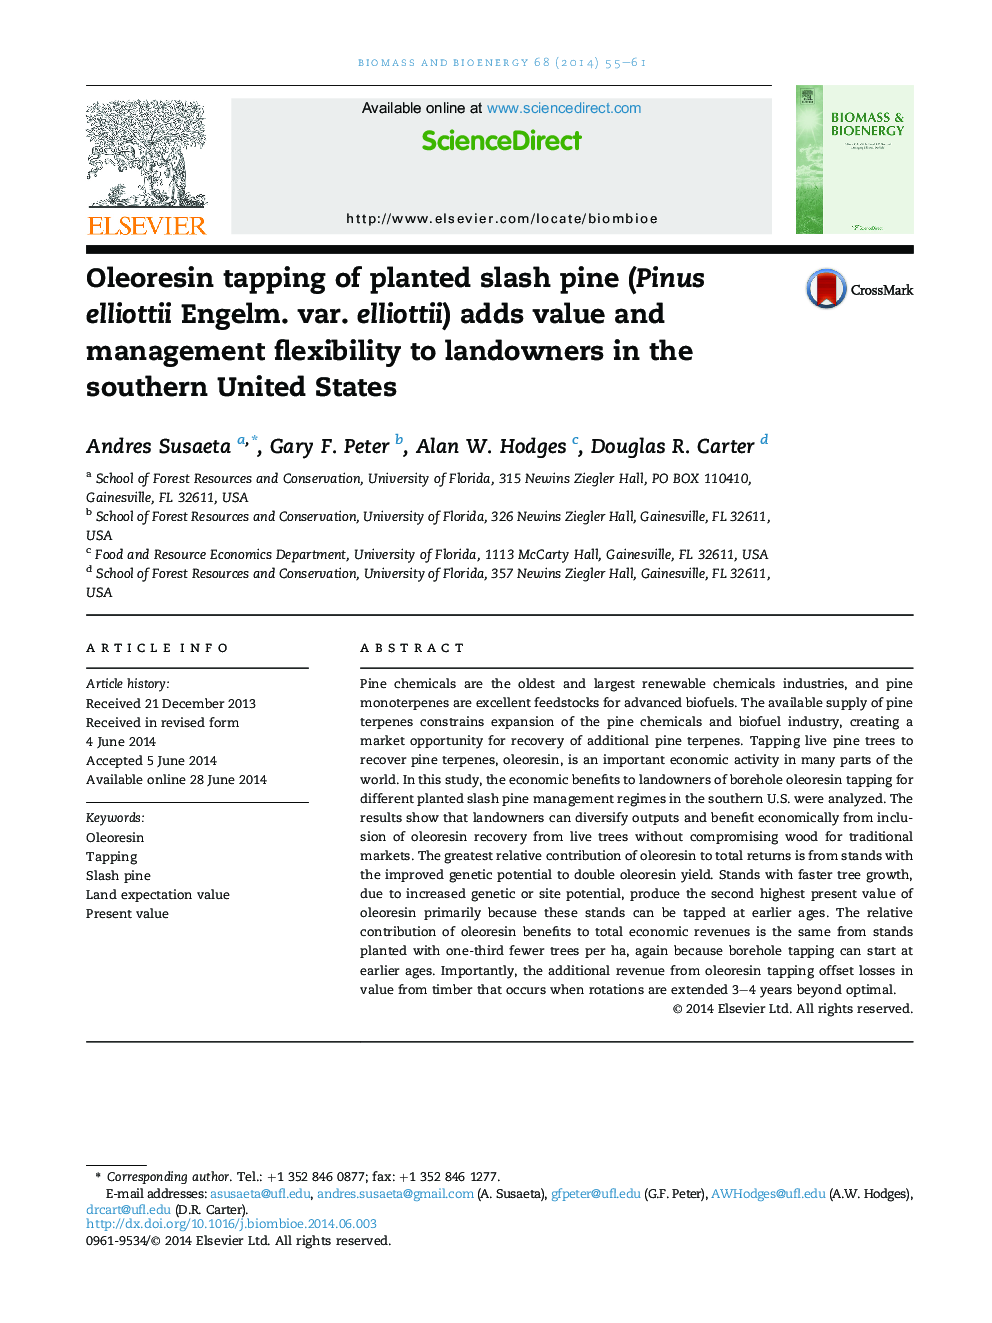 Oleoresin tapping of planted slash pine (Pinus elliottii Engelm. var. elliottii) adds value and management flexibility to landowners in the southern United States